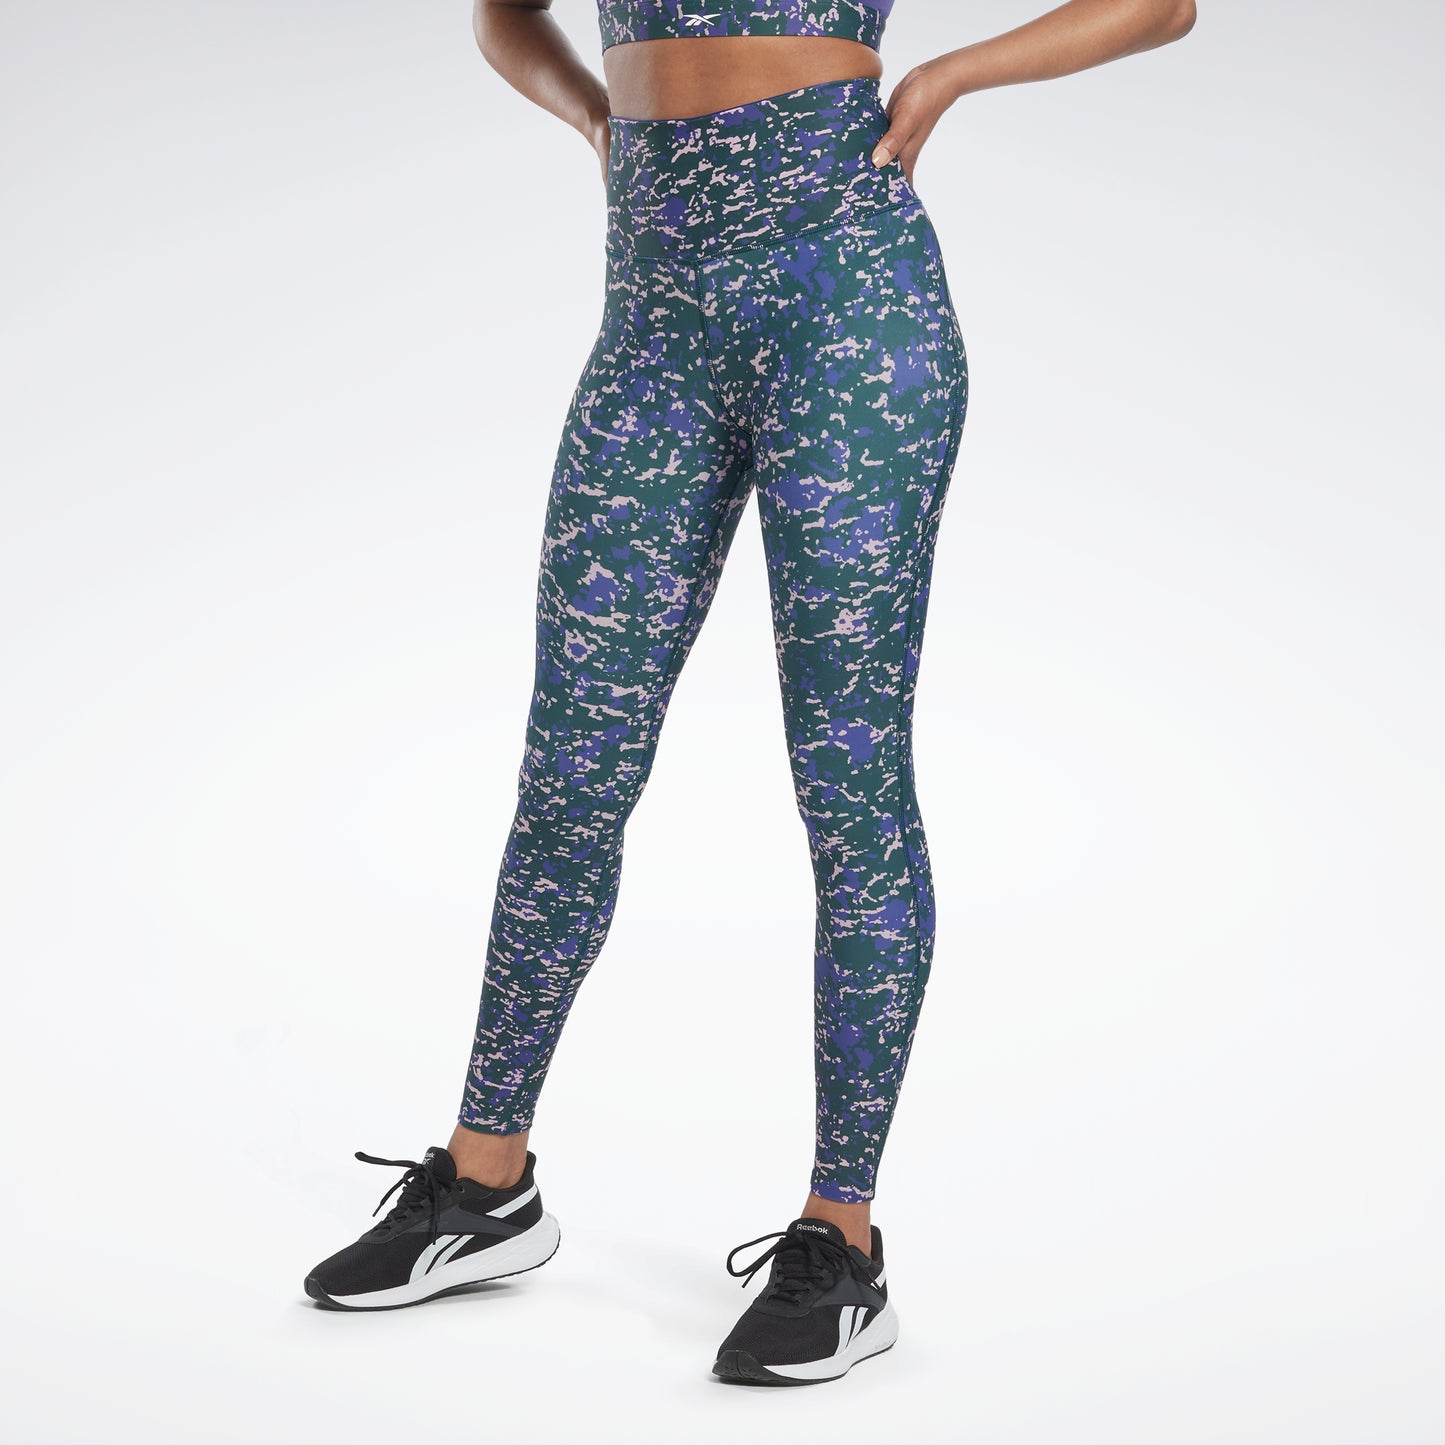 $50 - $100 Blue Recycled Polyester Tights & Leggings.